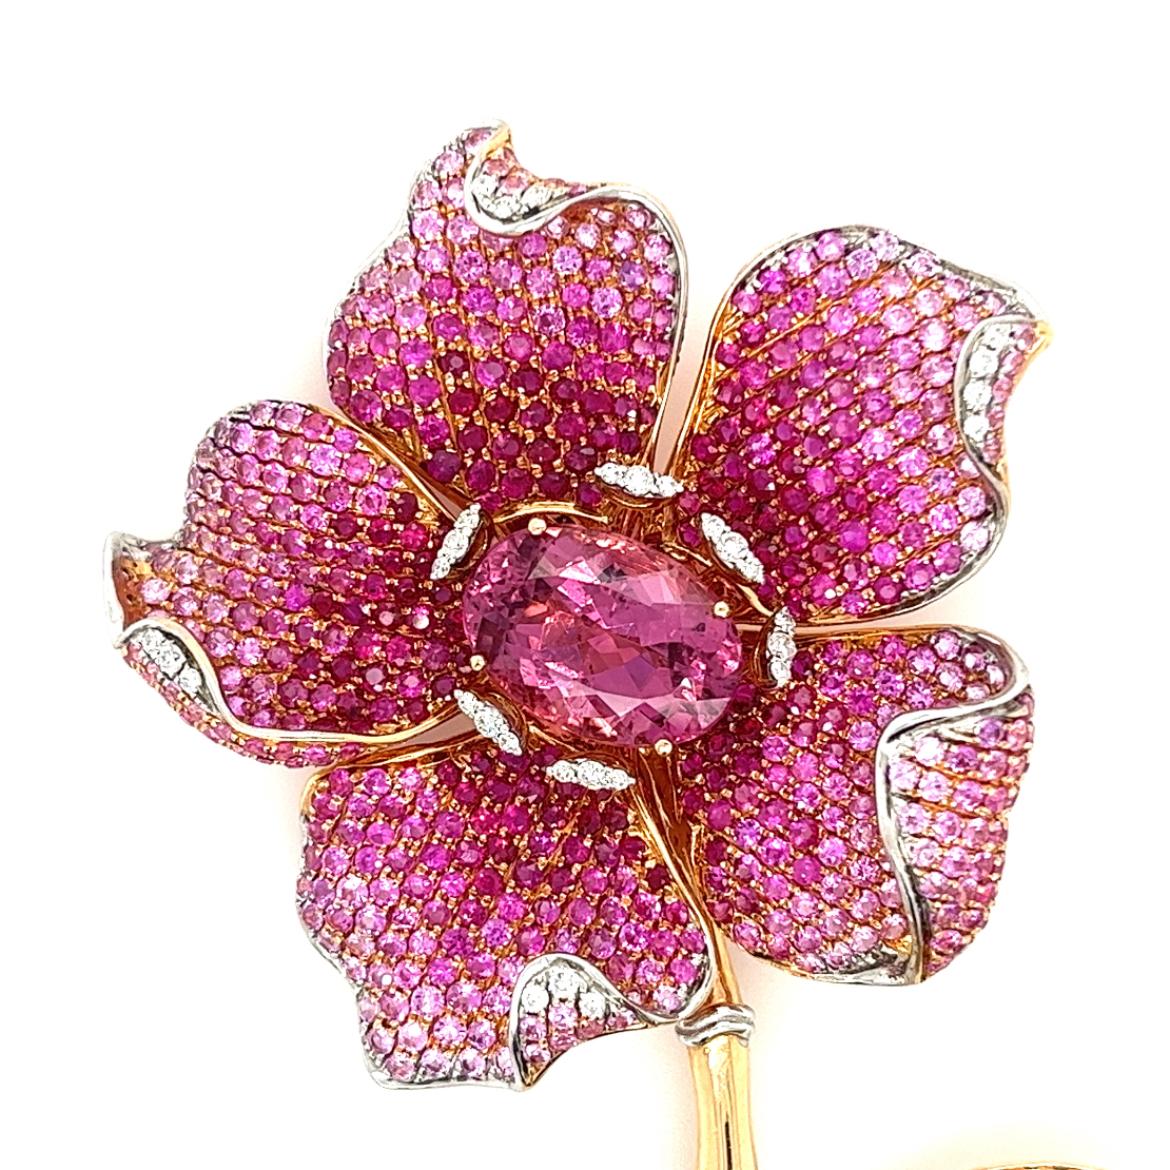 18K Rose Gold Flower Brooch with
Diamonds & Rubies & Pink Sapphires
32 Diamonds - 0.78 CT
56 Green Garnets - 1.16 CT
1 Tourmaline - 7.48 CT
535 Rubies/Pink Sapphires - 9.97 CT
18K Rose Gold - 23.43 GM

Indulge in the timeless elegance of our 18K